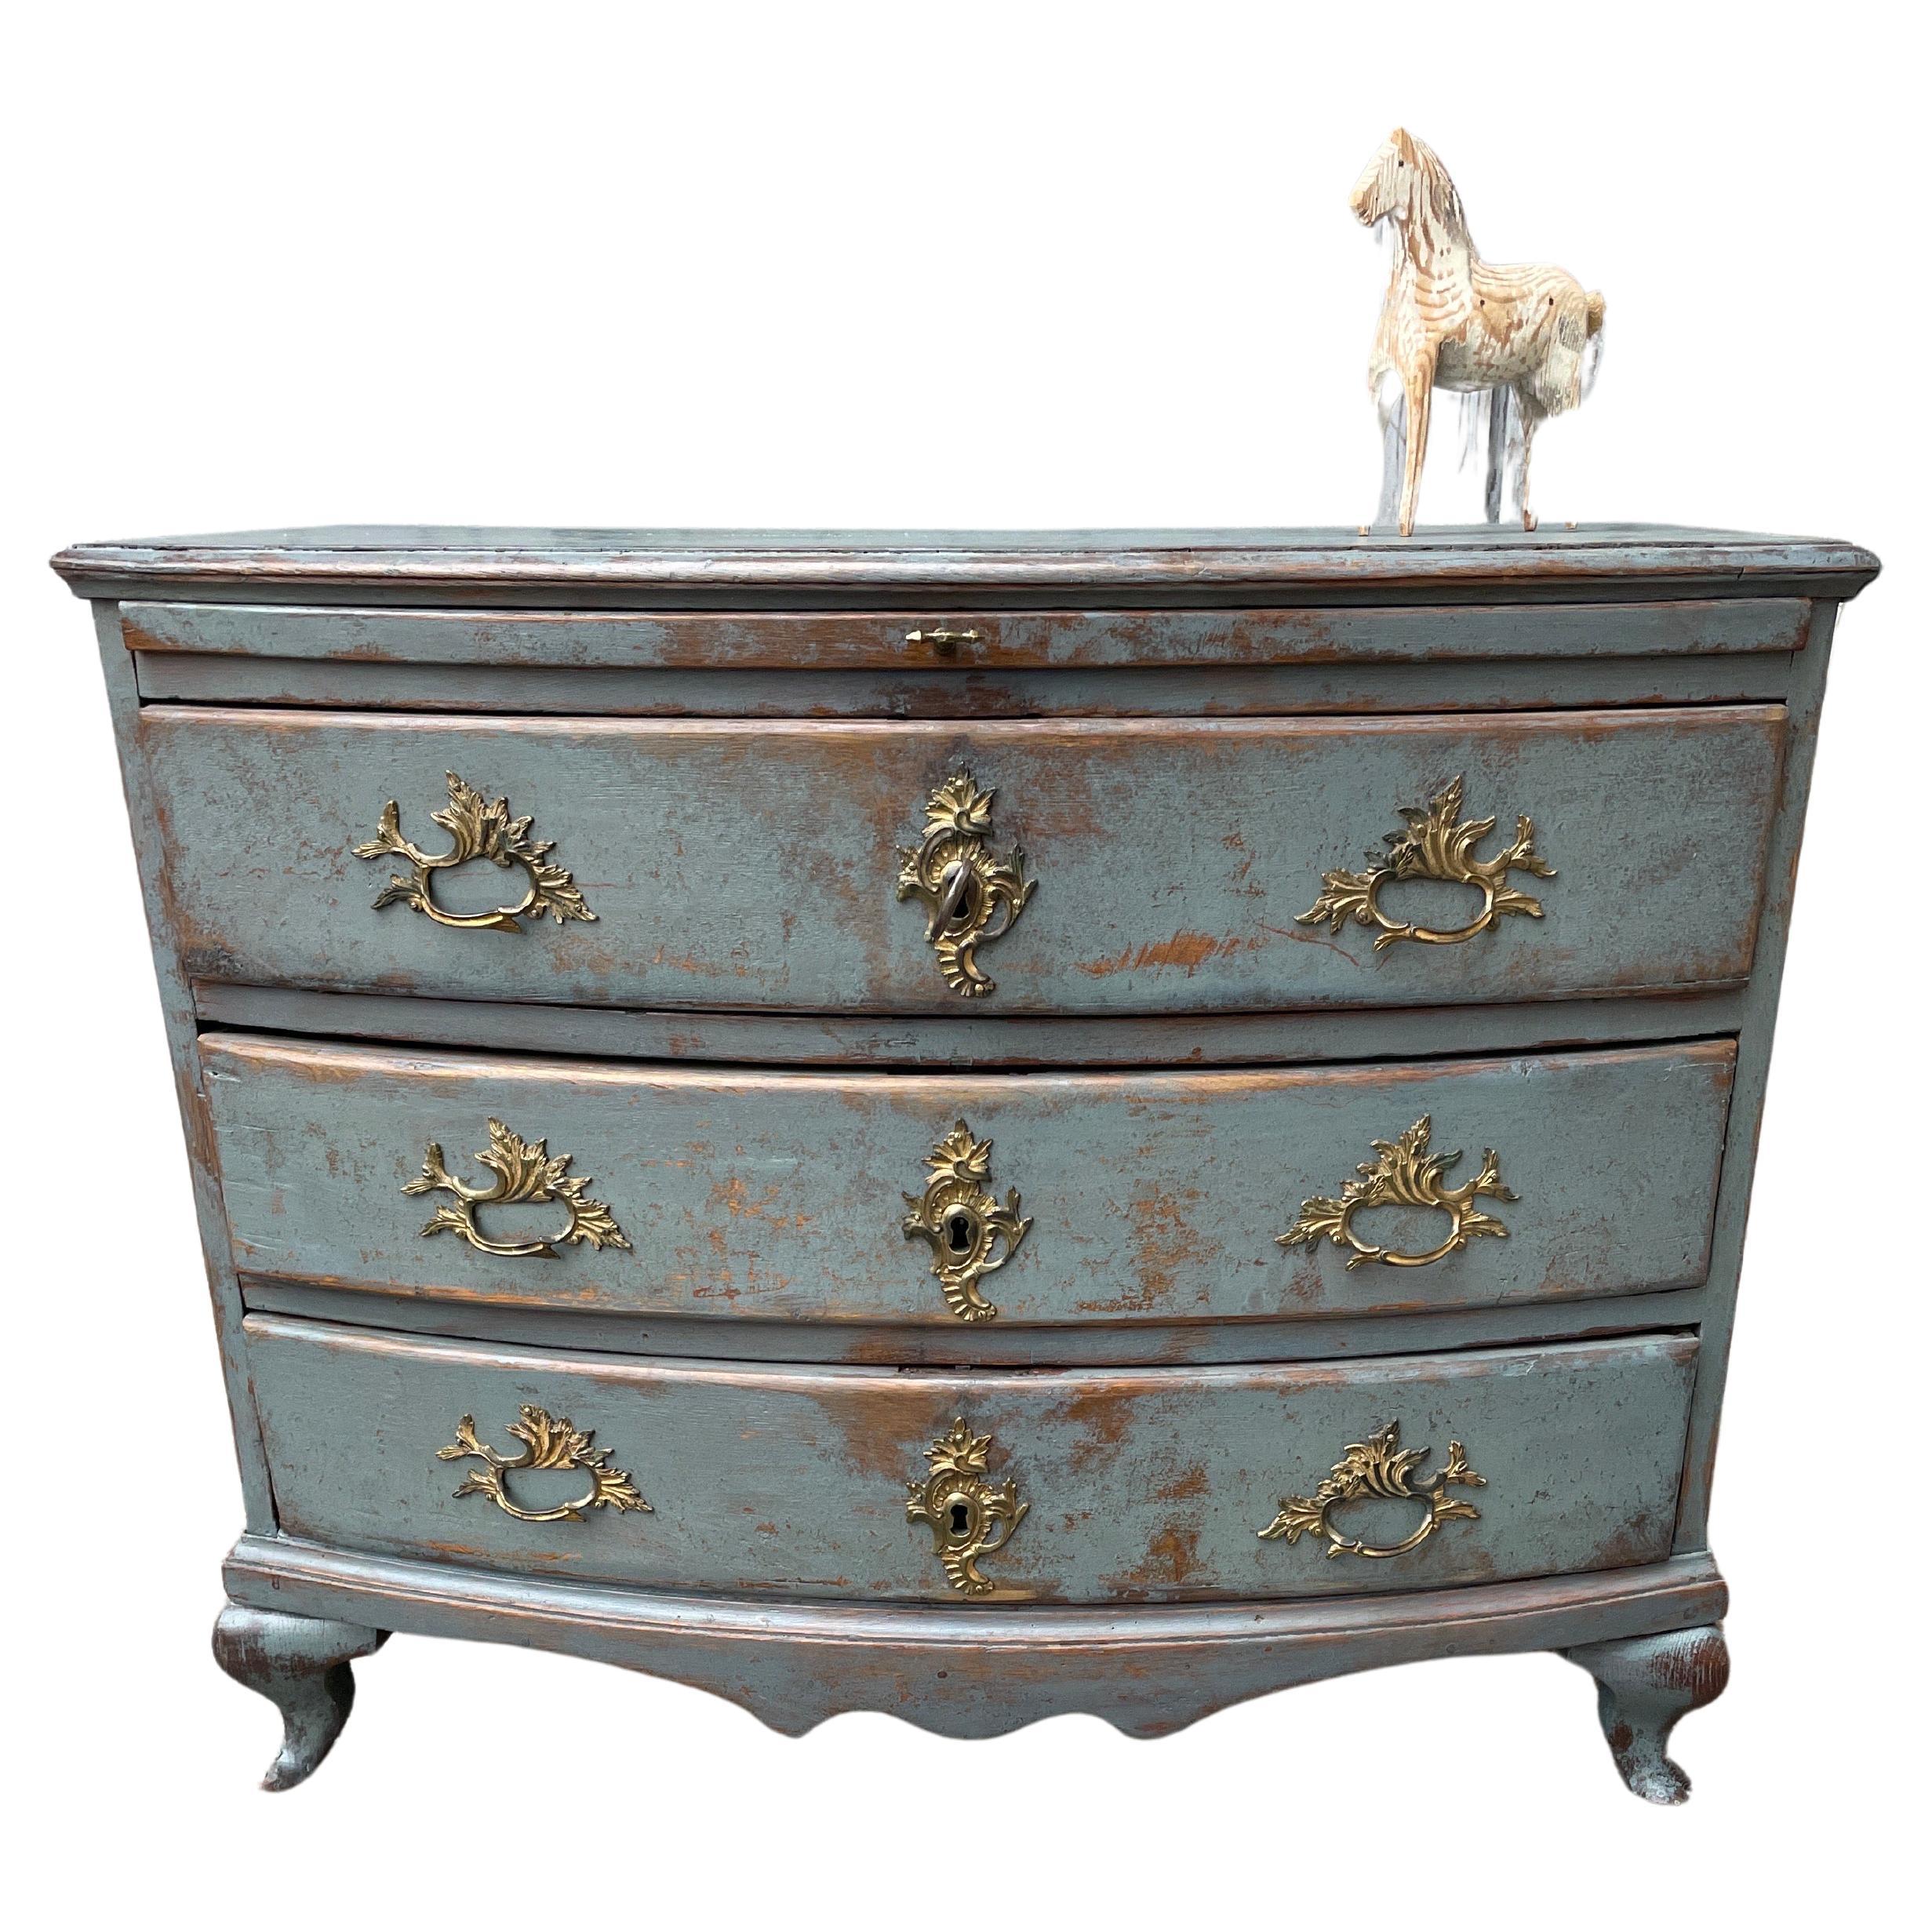 An exquisite 18th Century baroque 3 drawer chest. This blue painted three-drawer chest features a bow front, thick wood top with pull out shelf and scalloping on the front. The three drawers are adorned with their original baroque handles and